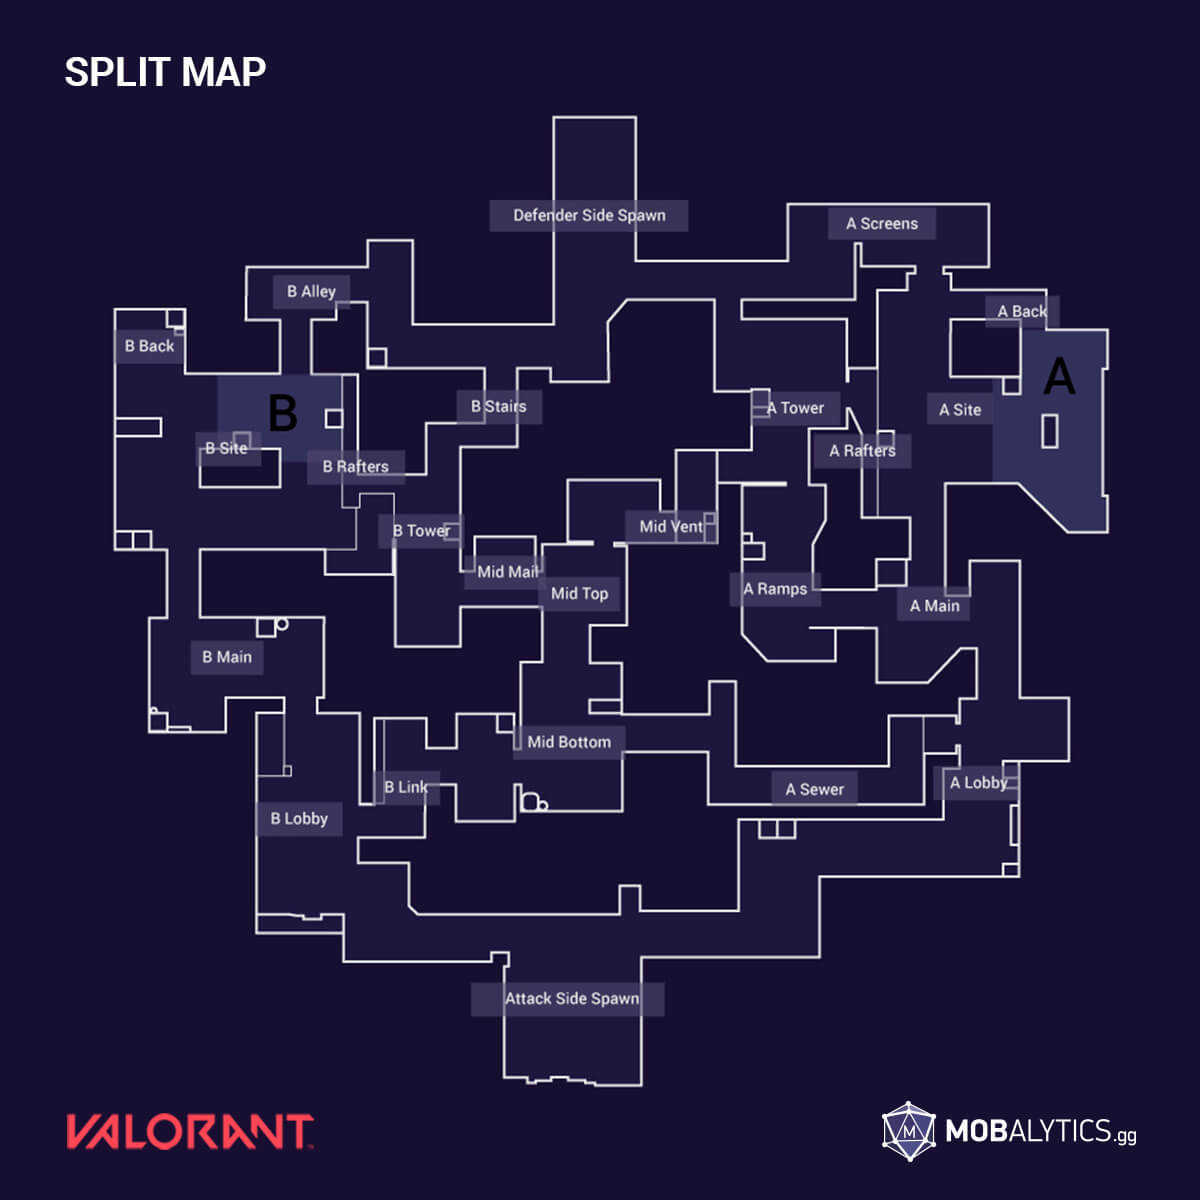 Valorant: Split map description for defenders and attackers